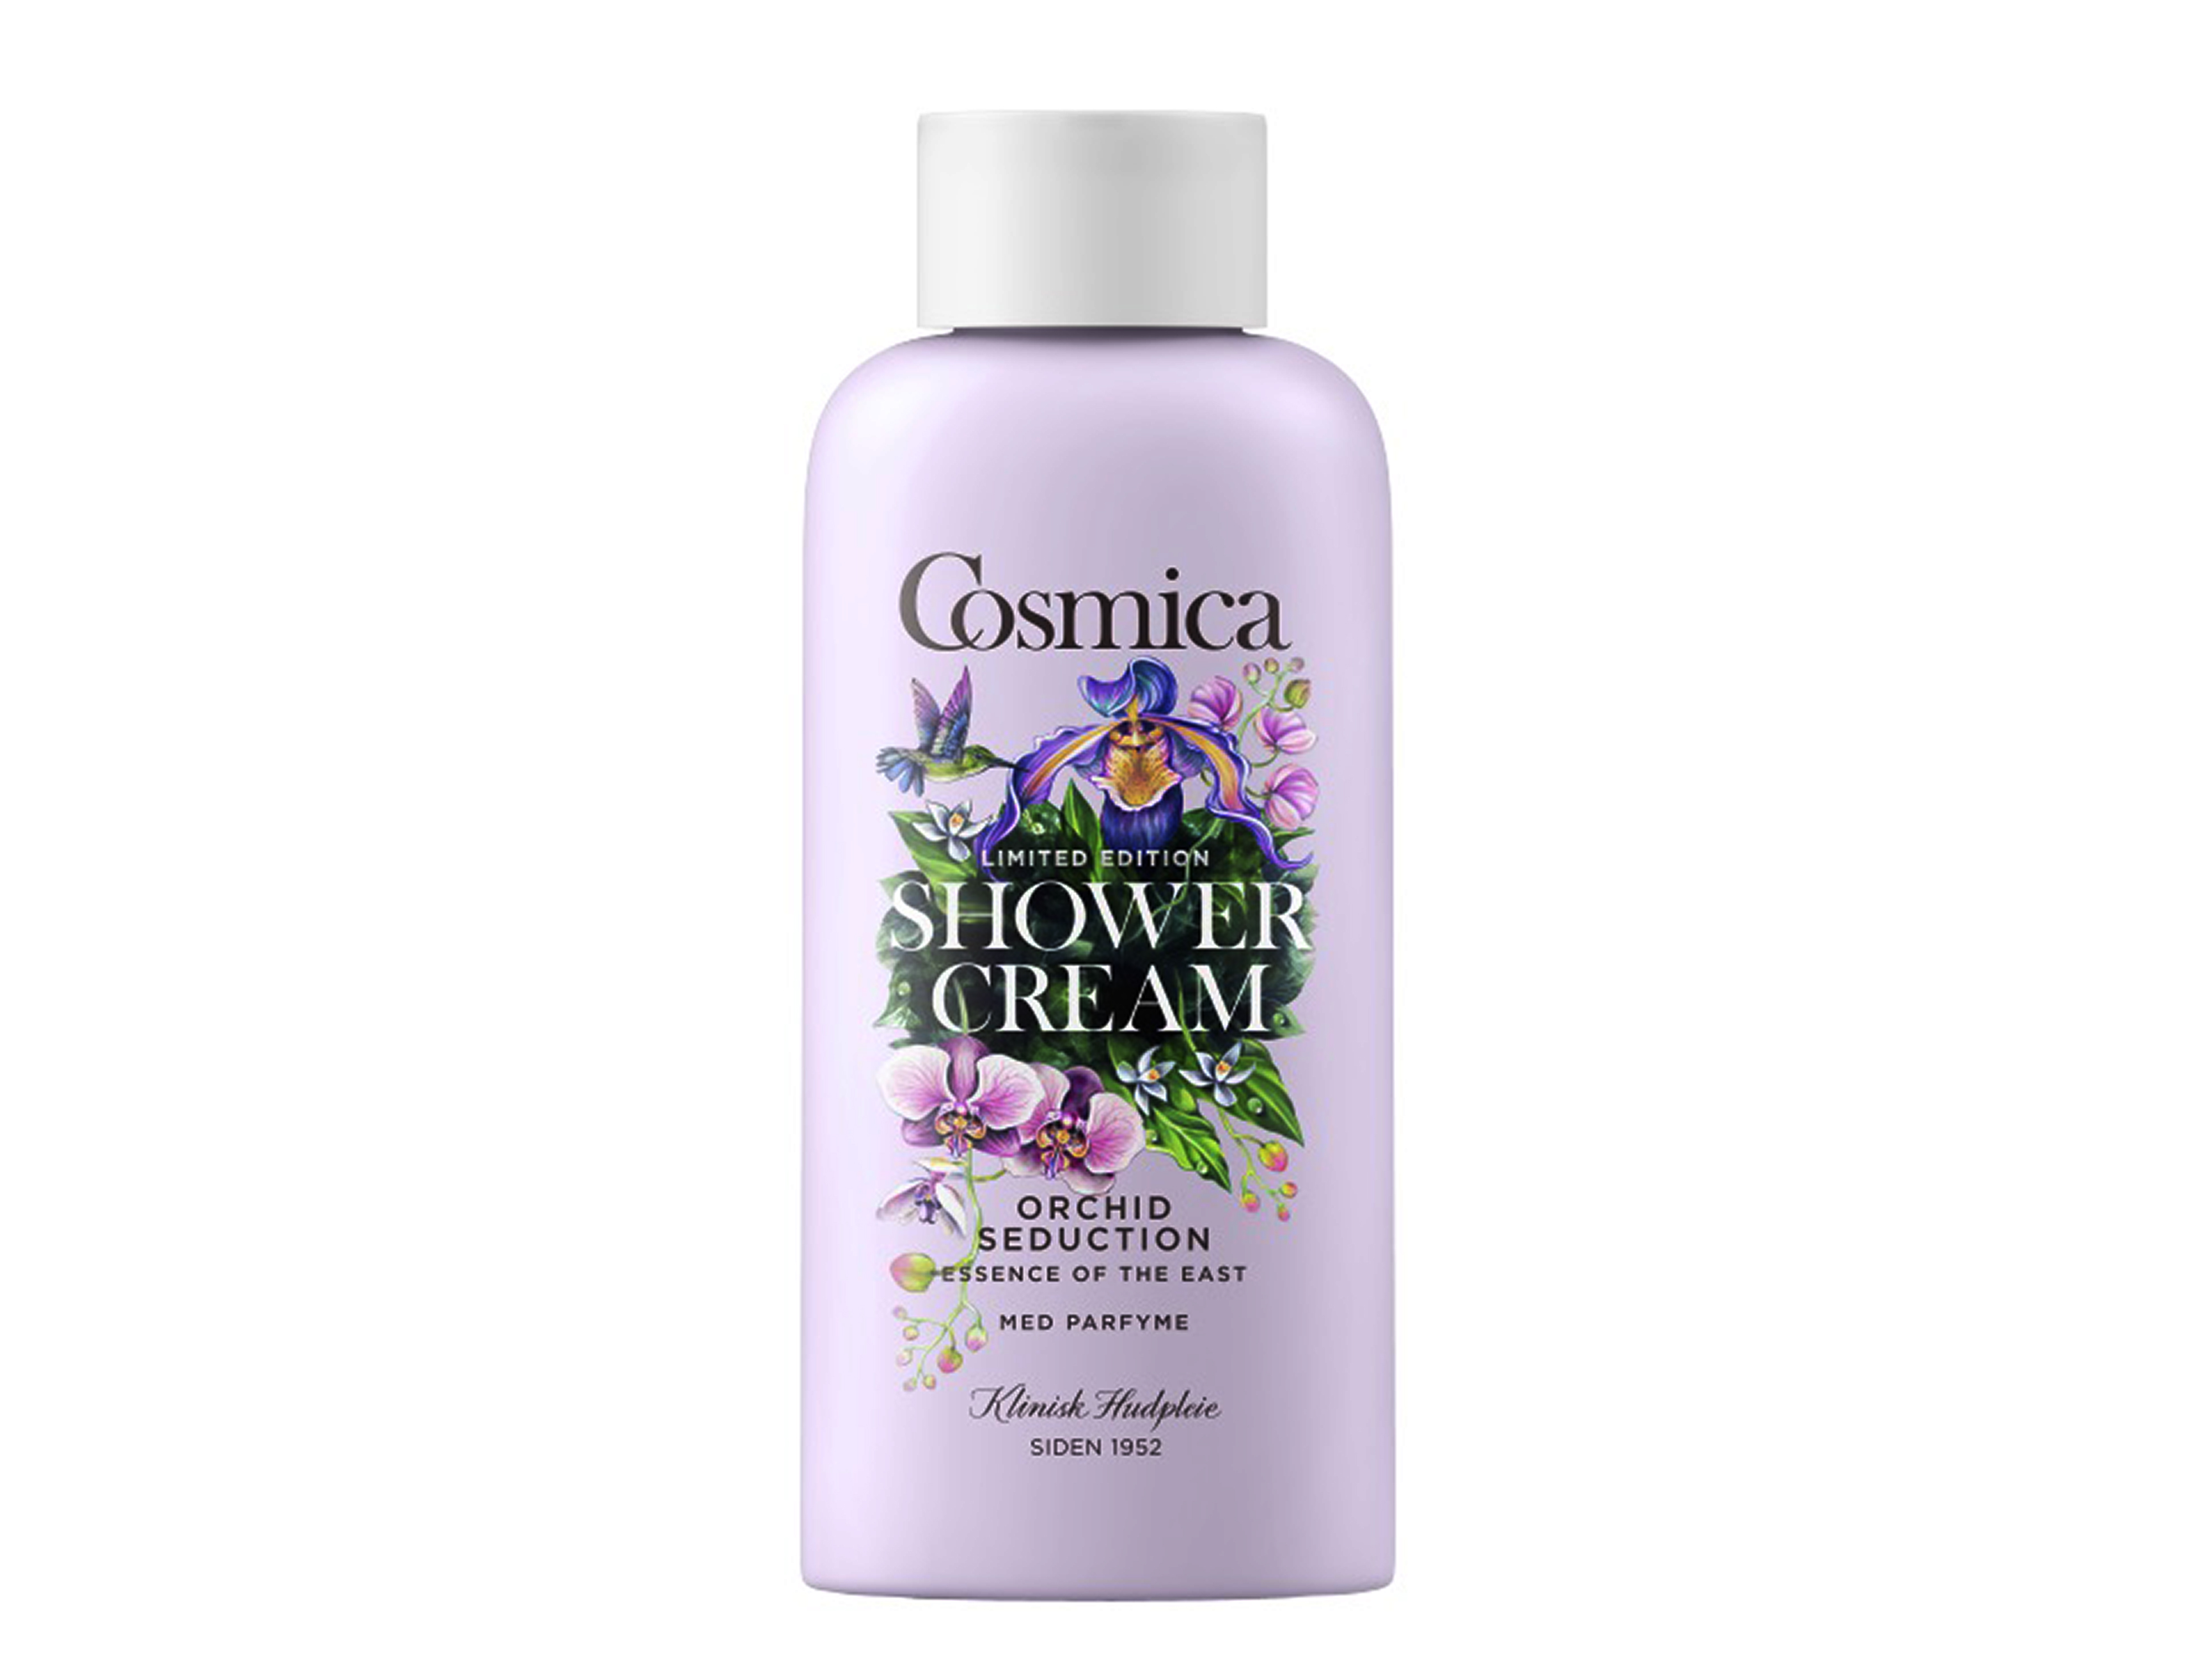 Cosmica shower orchid seduction, Limited Edition, 200 ml